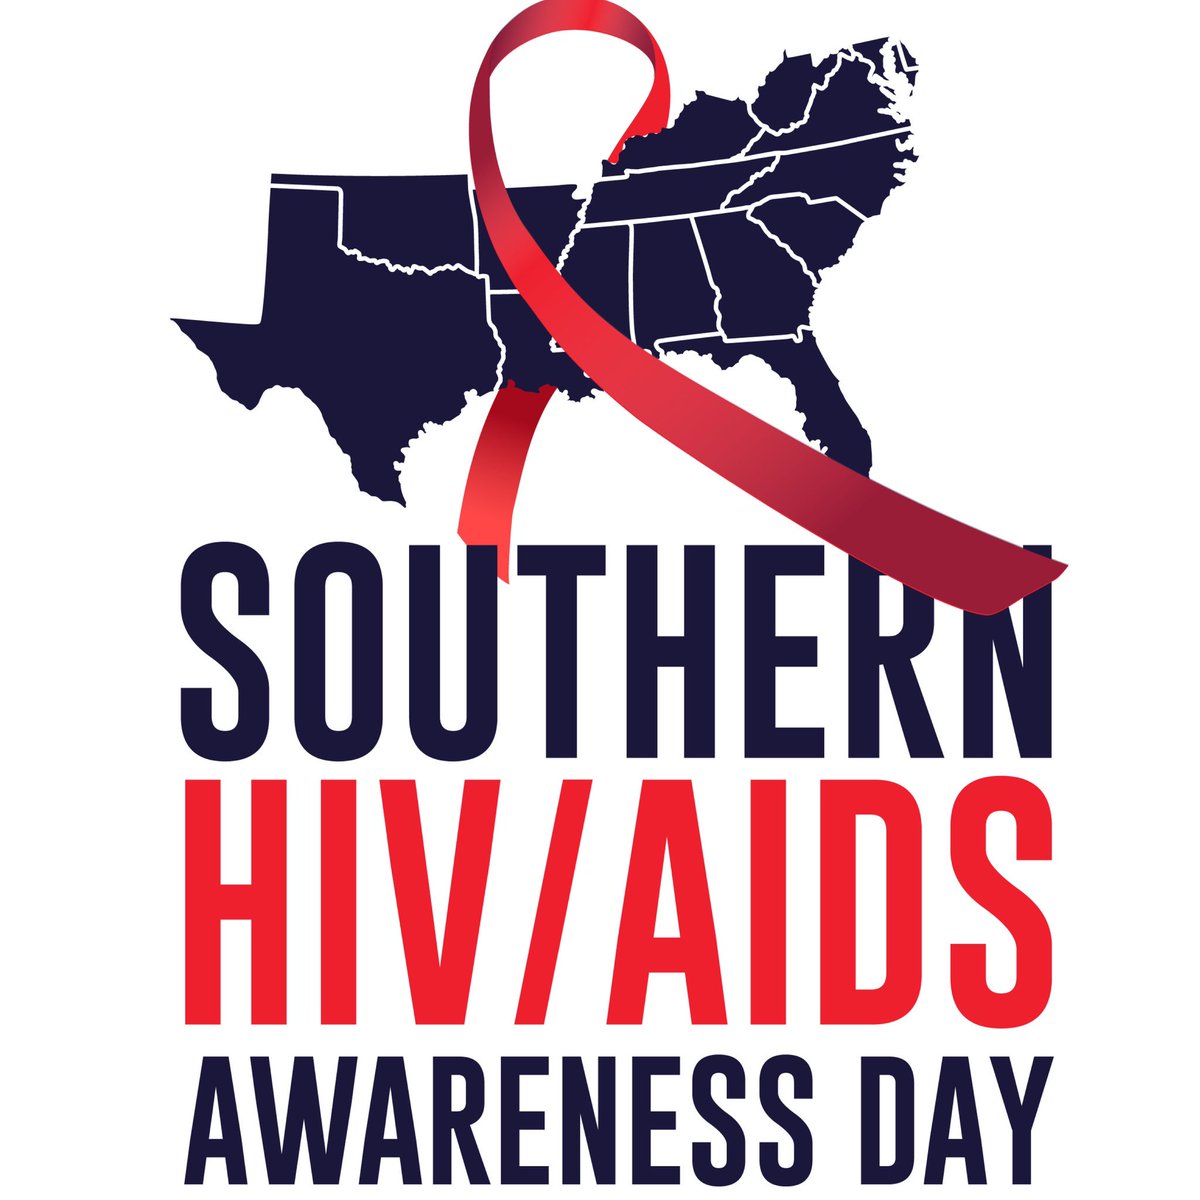 Today is the inaugural Southern HIV/AIDS Awareness Day. This day was birth out of vision and passion to see the South unite against an epidemic that is disproportionately affecting our southern families and communities. Today let’s rewrite our narrative with solutions! #SHAAD2019